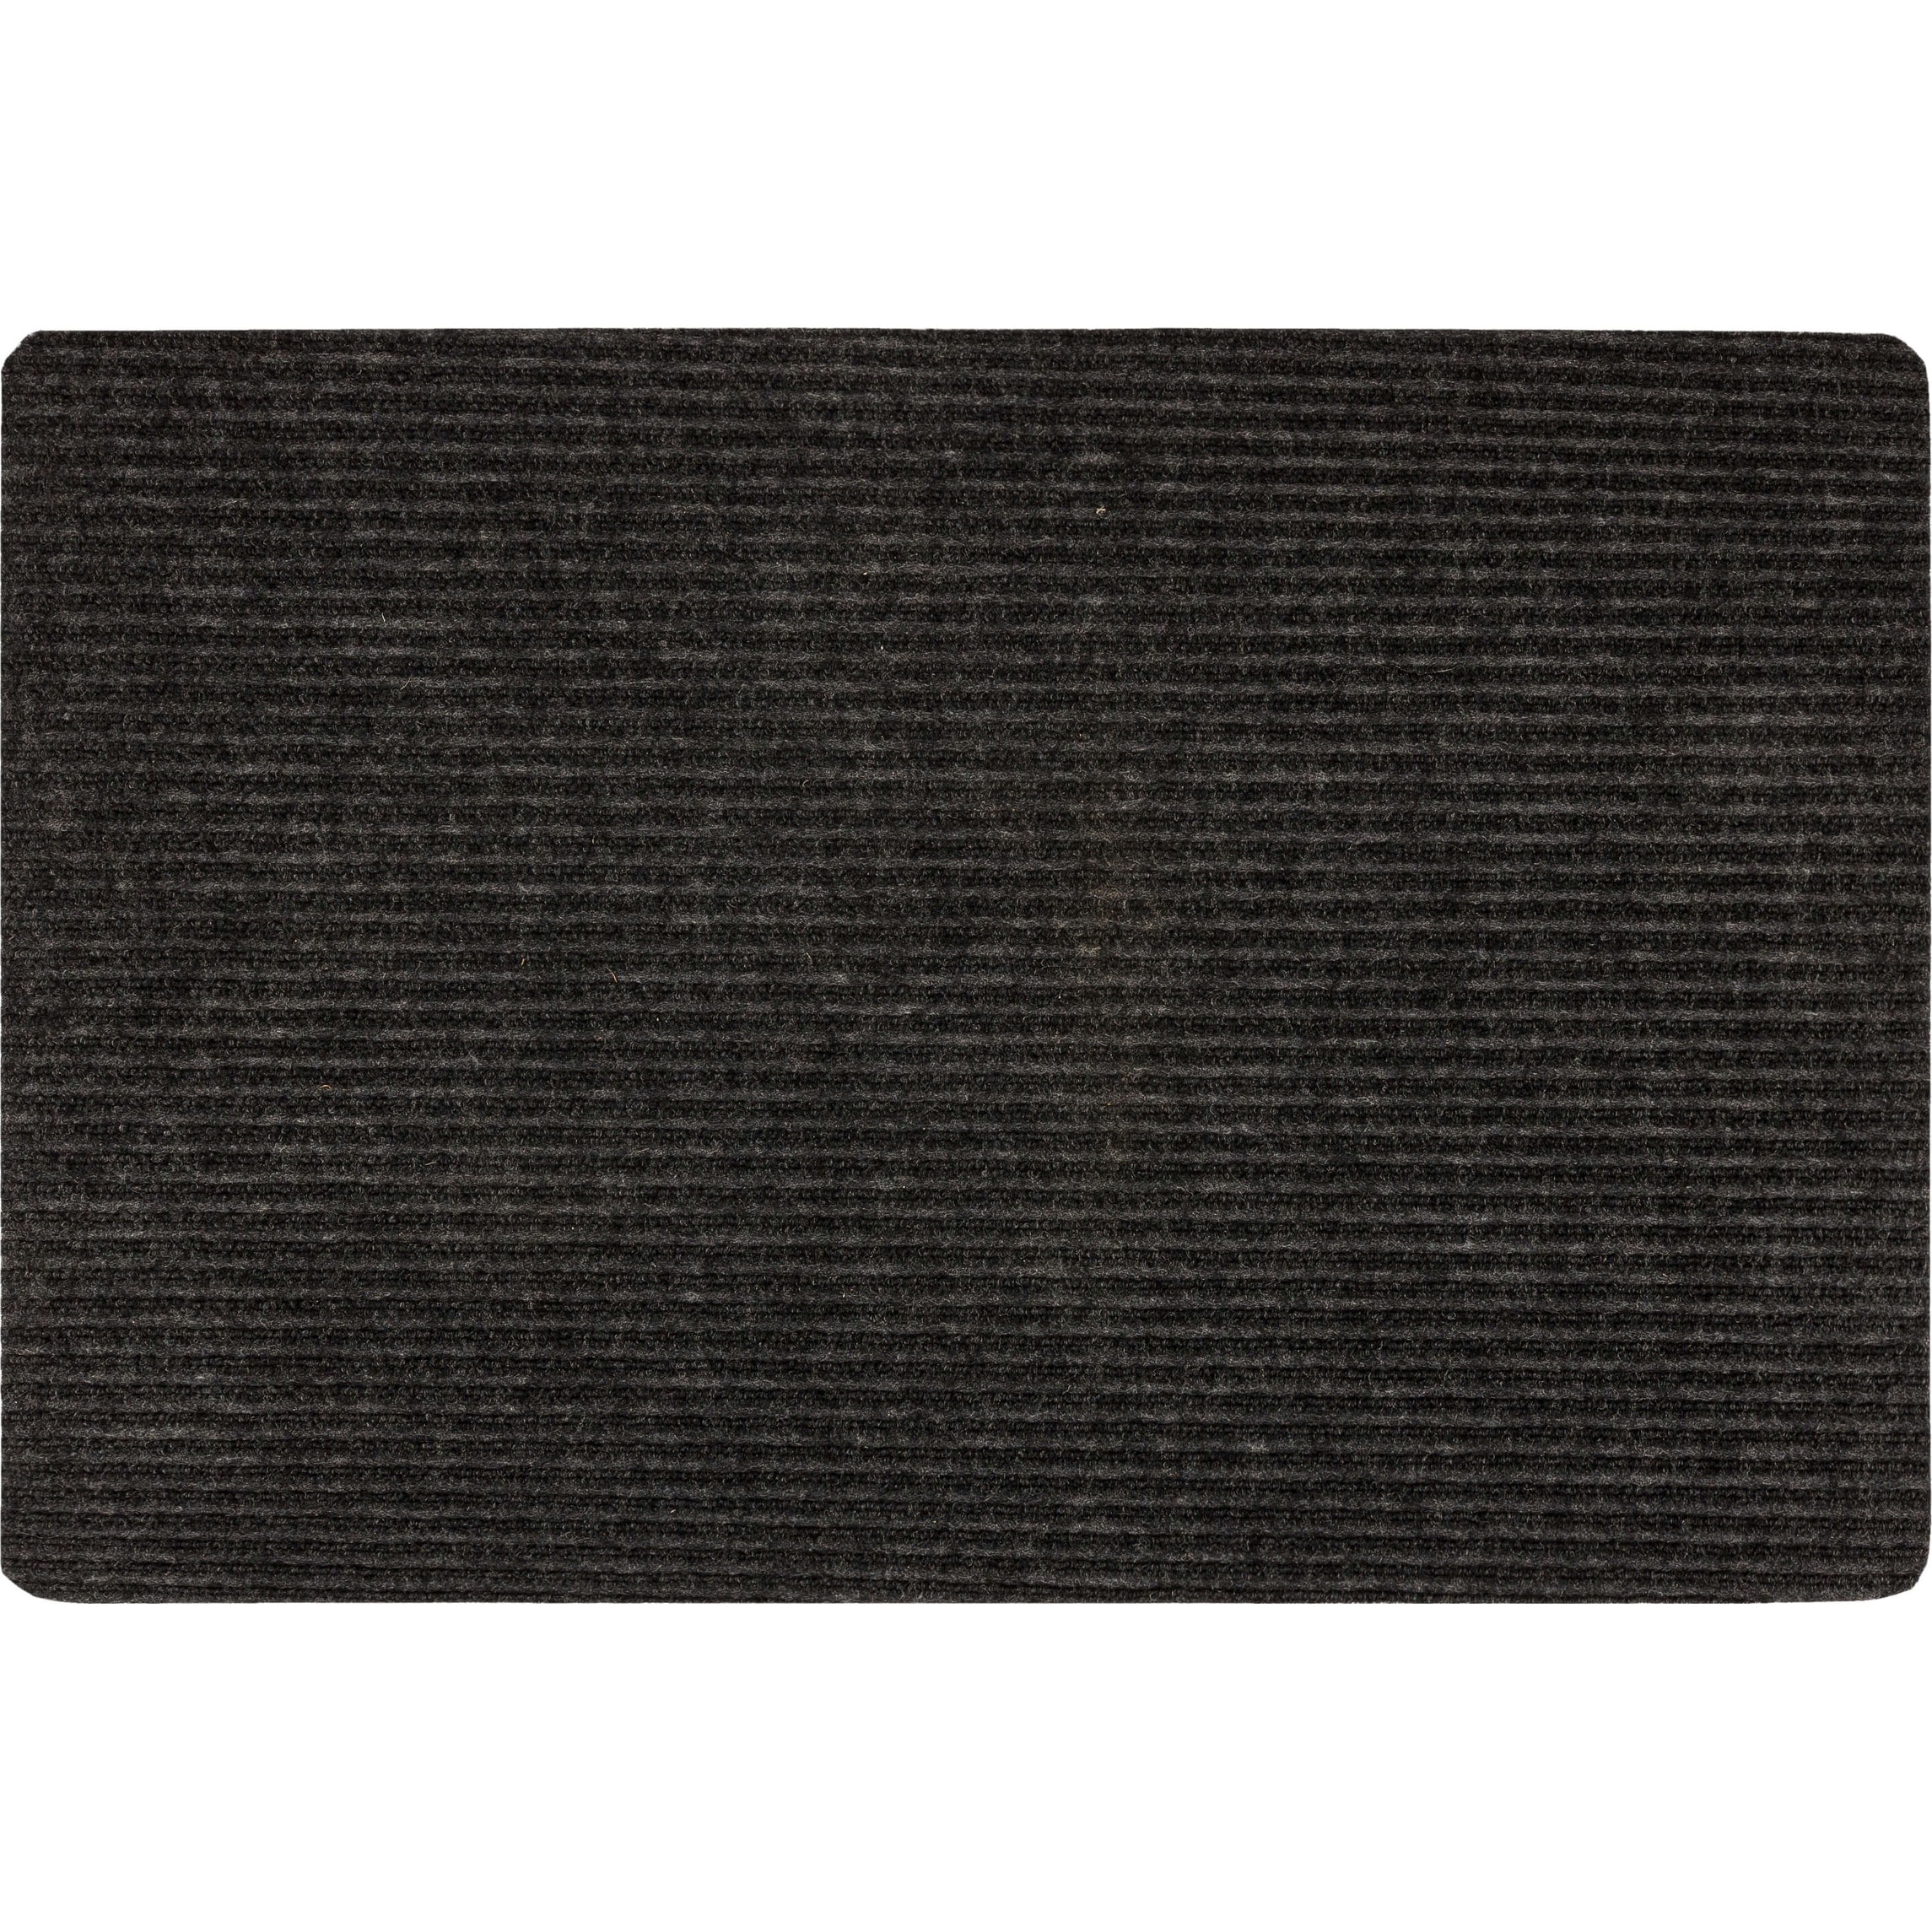 https://ak1.ostkcdn.com/images/products/is/images/direct/70e4d29f8cc9c2ab01b5f4e998de138bce0b82c8/Mohawk-Home-Utility-Floor-Mat-for-Garage%2C-Entryway%2C-Porch%2C-and-Laundry-Room.jpg